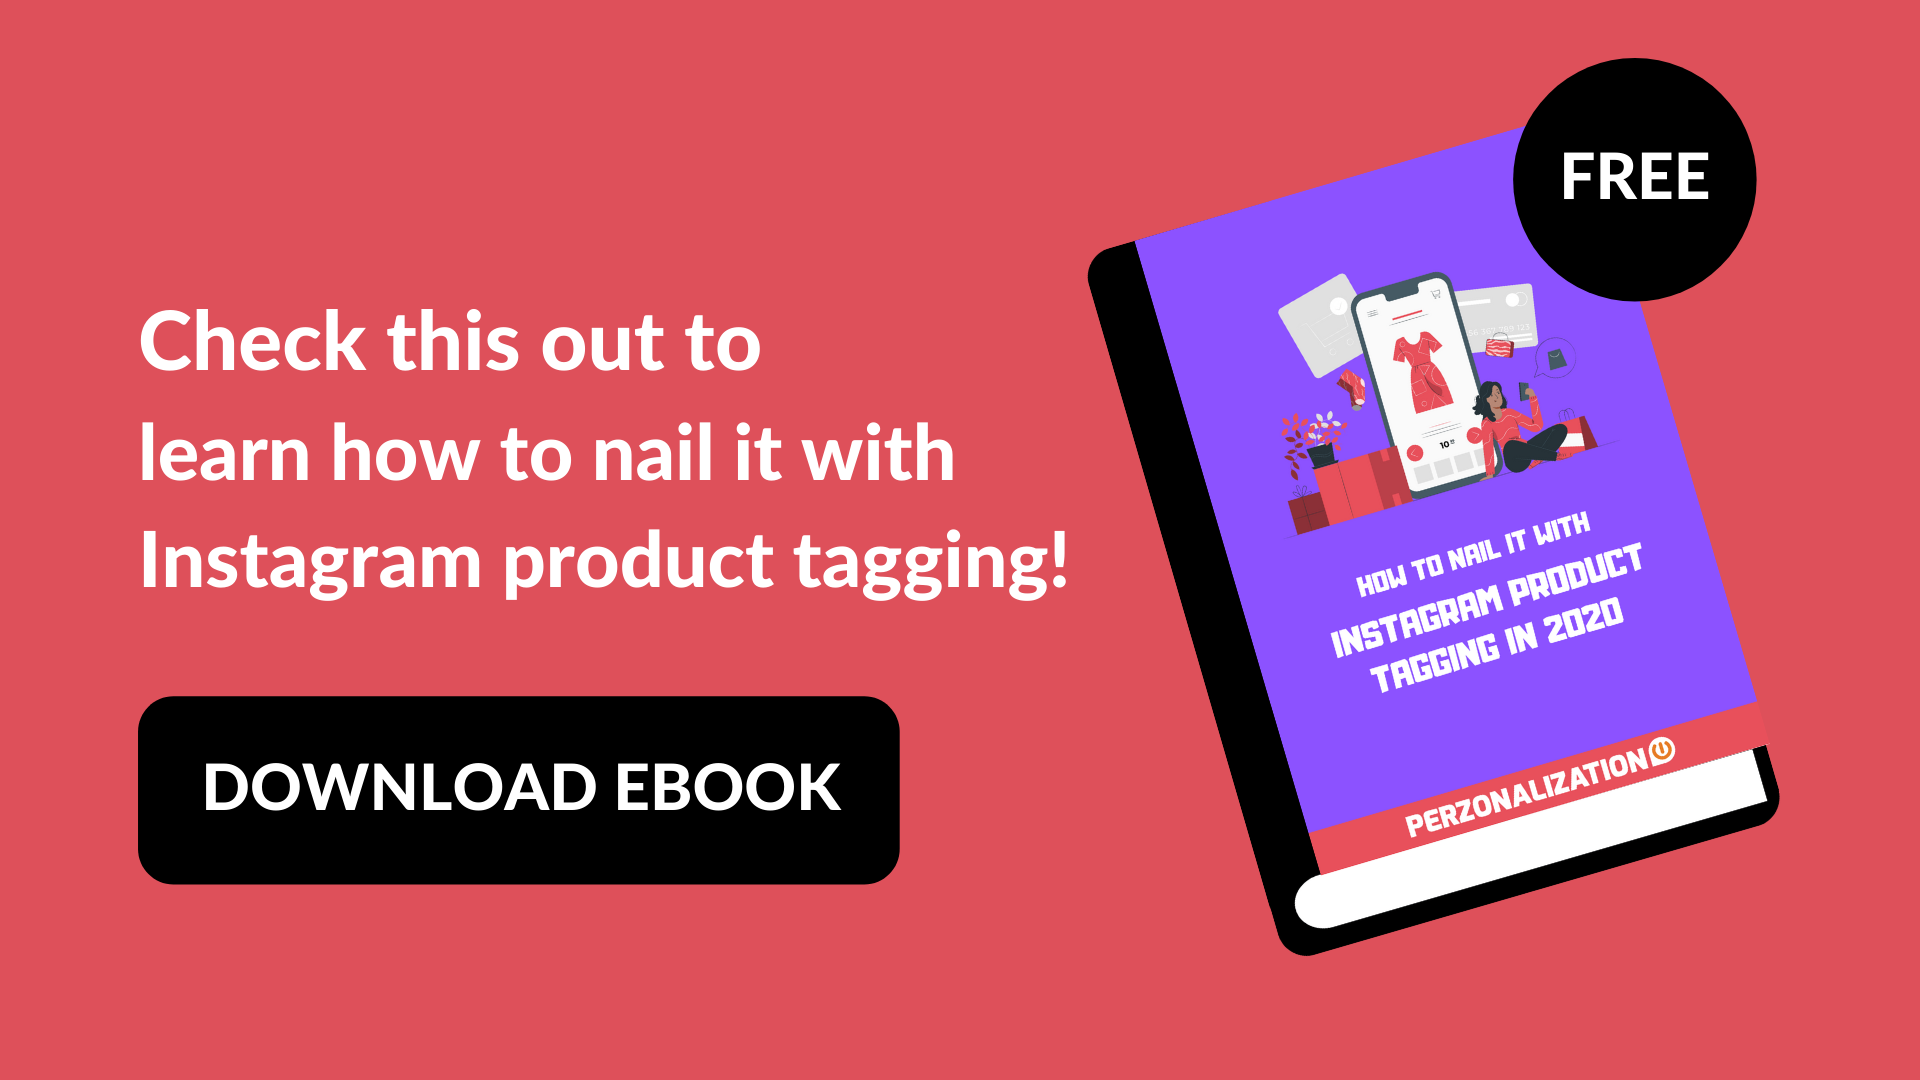 Instagram product tagging gives you the opportunity to go creative with your product tags and Instagram Shoppable posts to reach out to your consumer base. Find more in this free eBook!